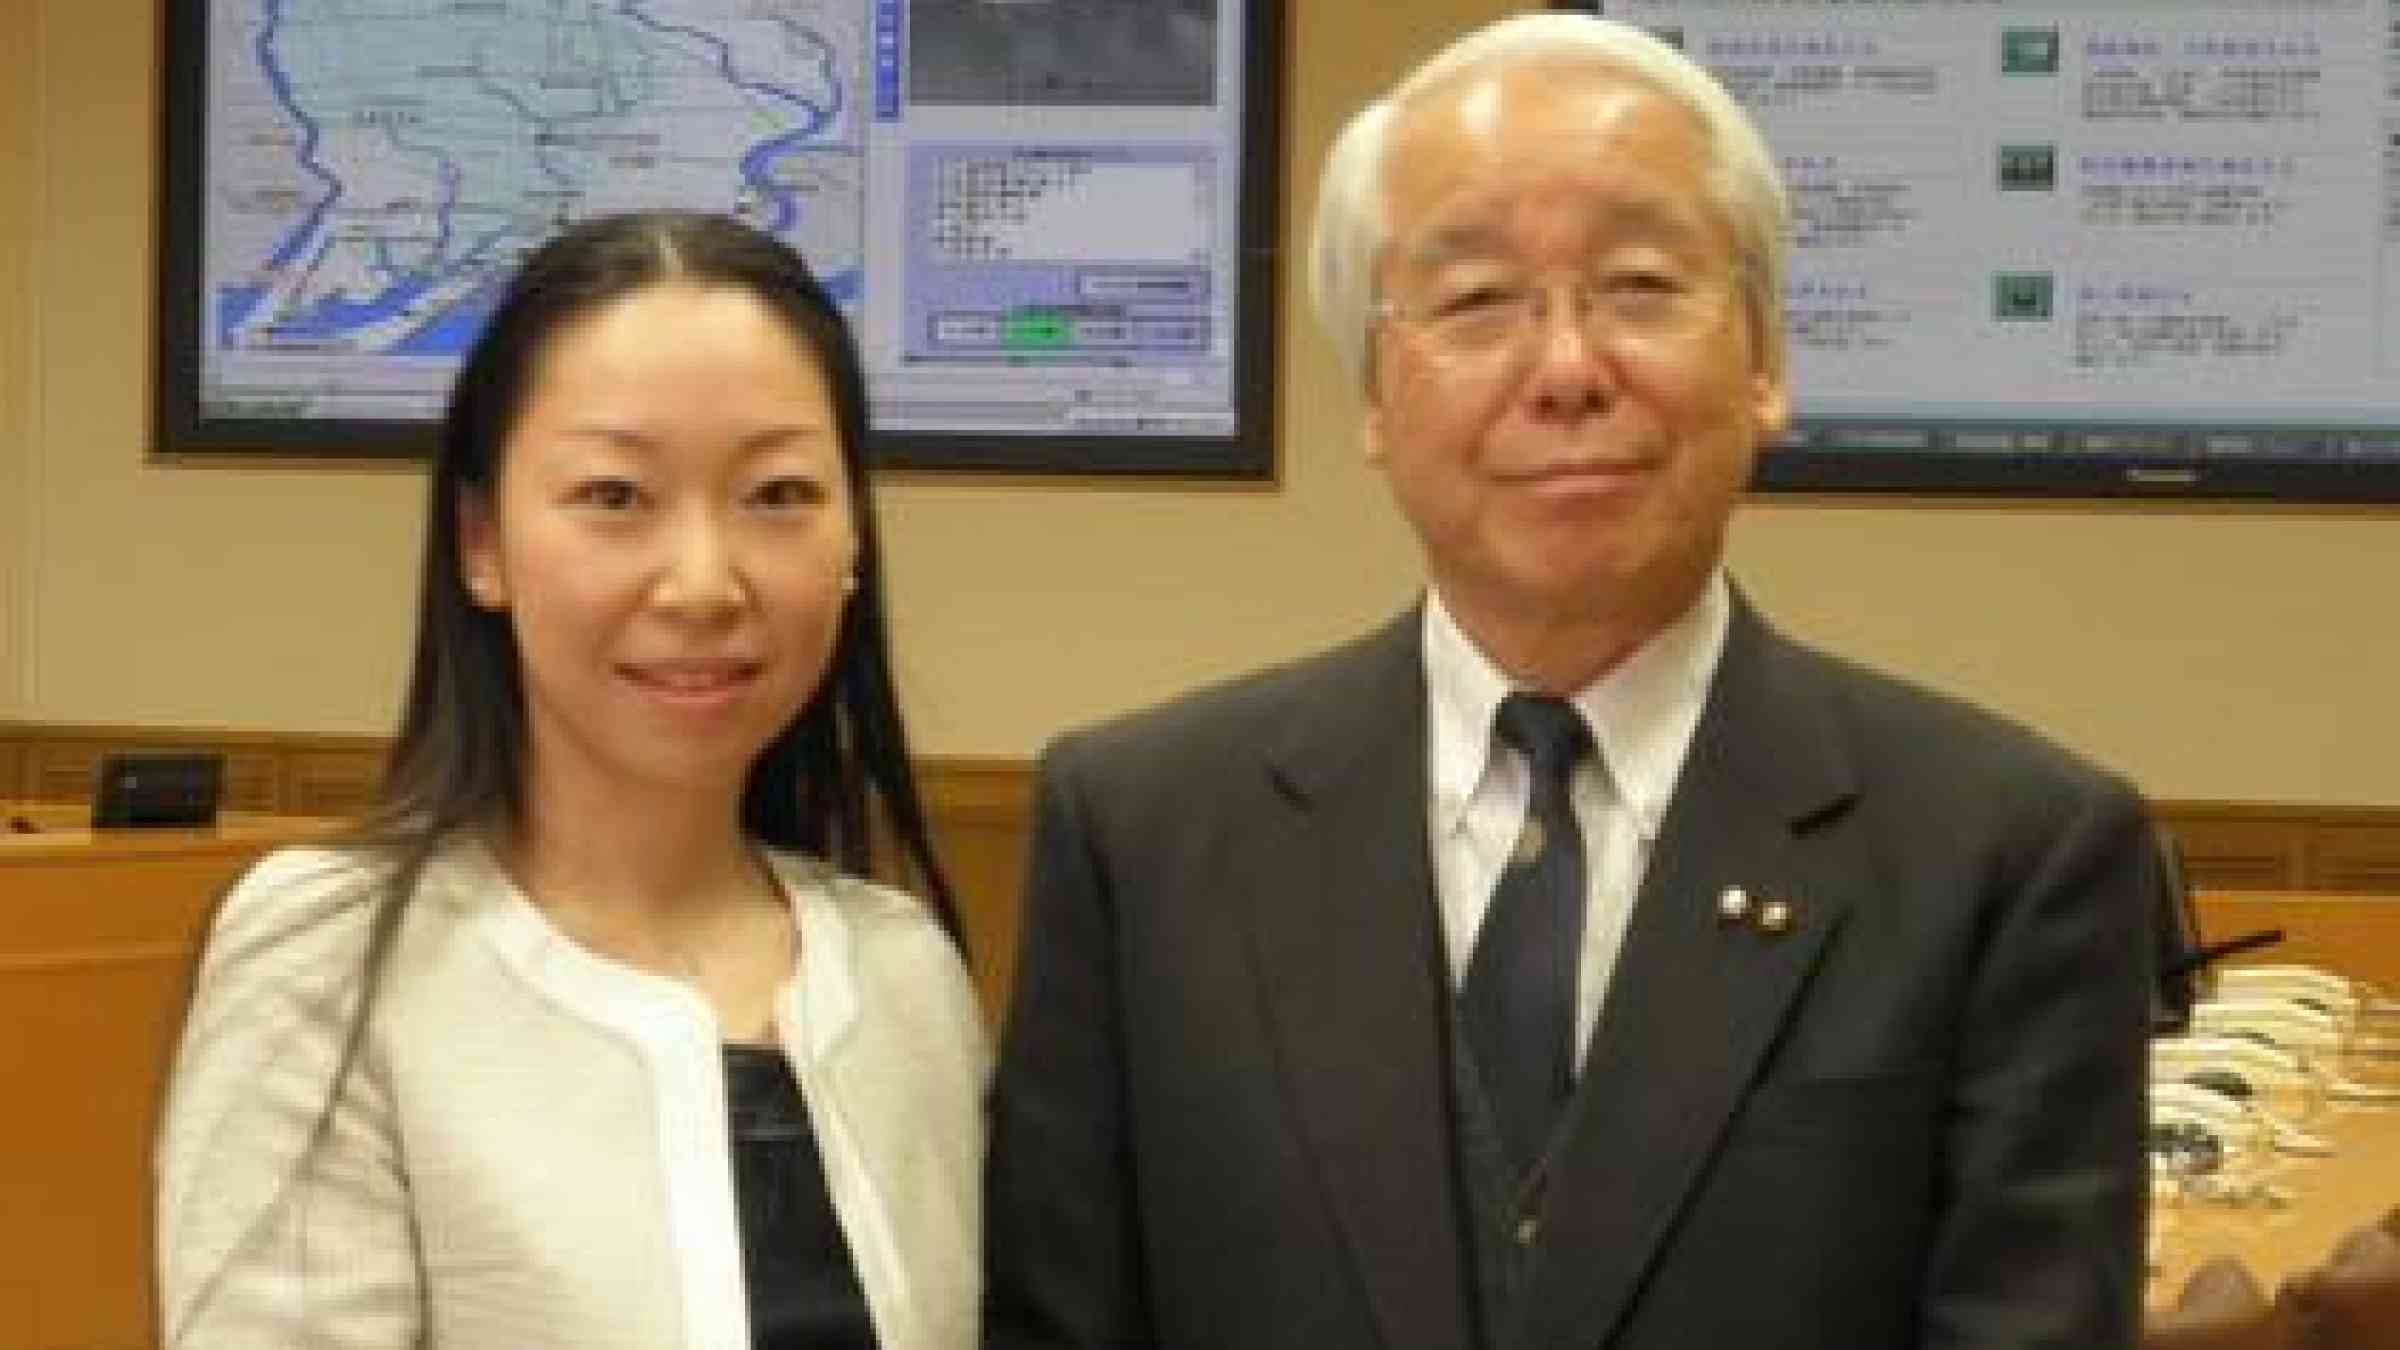 UNISDR officer Yuki Matsuoka with Toshizo Ido, Governor of Hyogo Prefecture. Governor Ido is a champion of the Making Cities Resilient campaign.